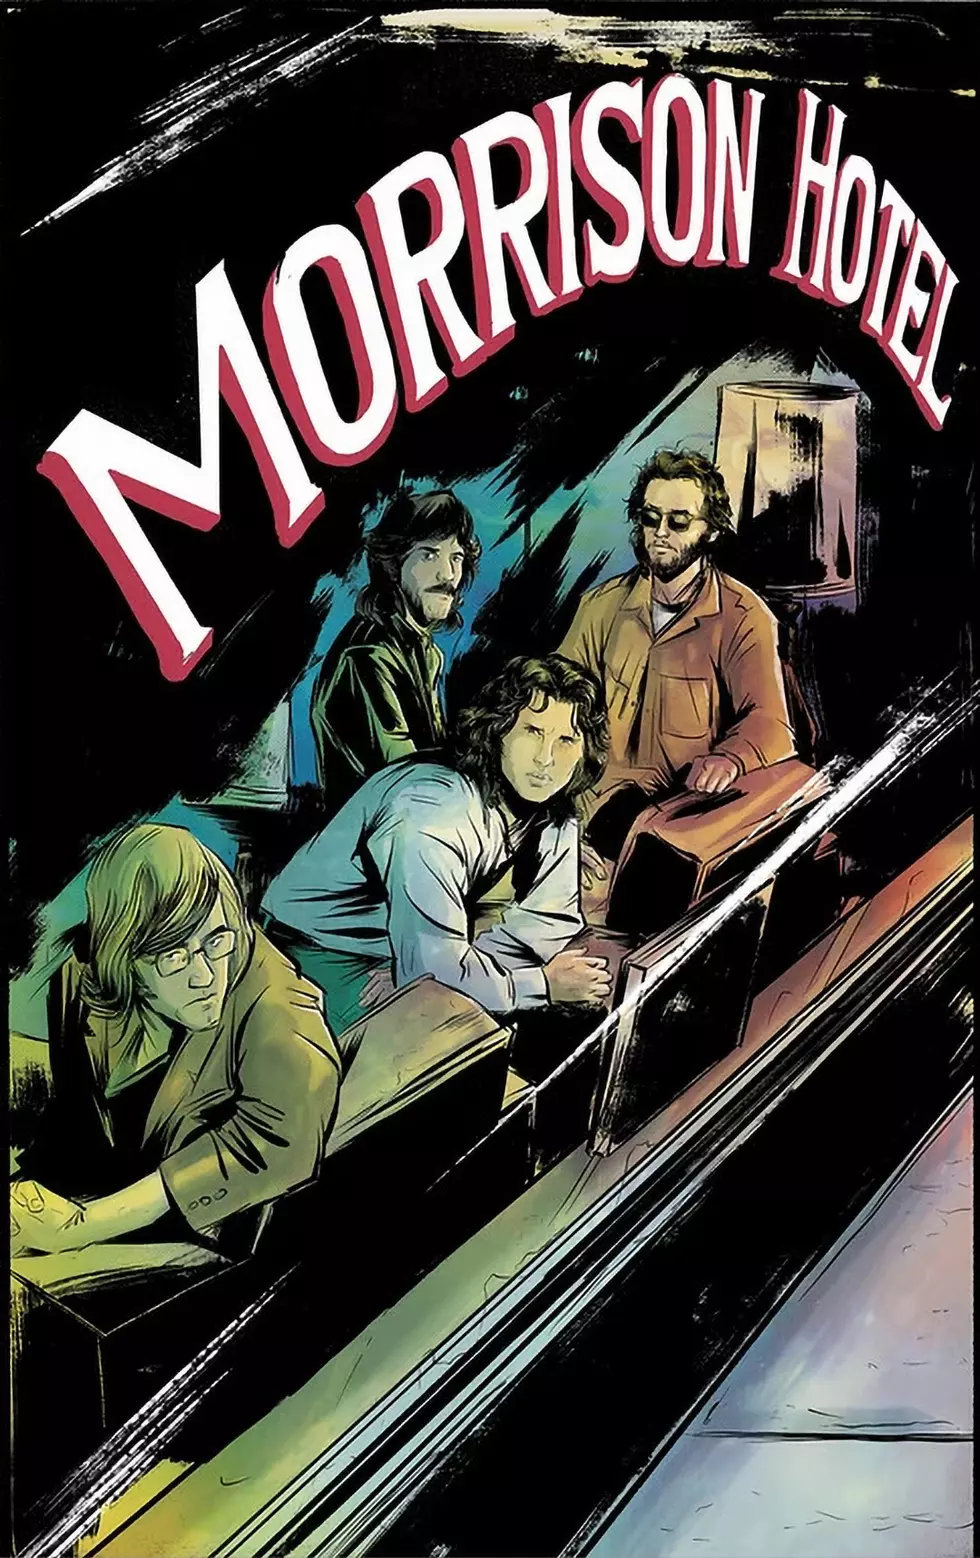 Doors Will Be Subject of ‘Morrison Hotel’ Comic Book